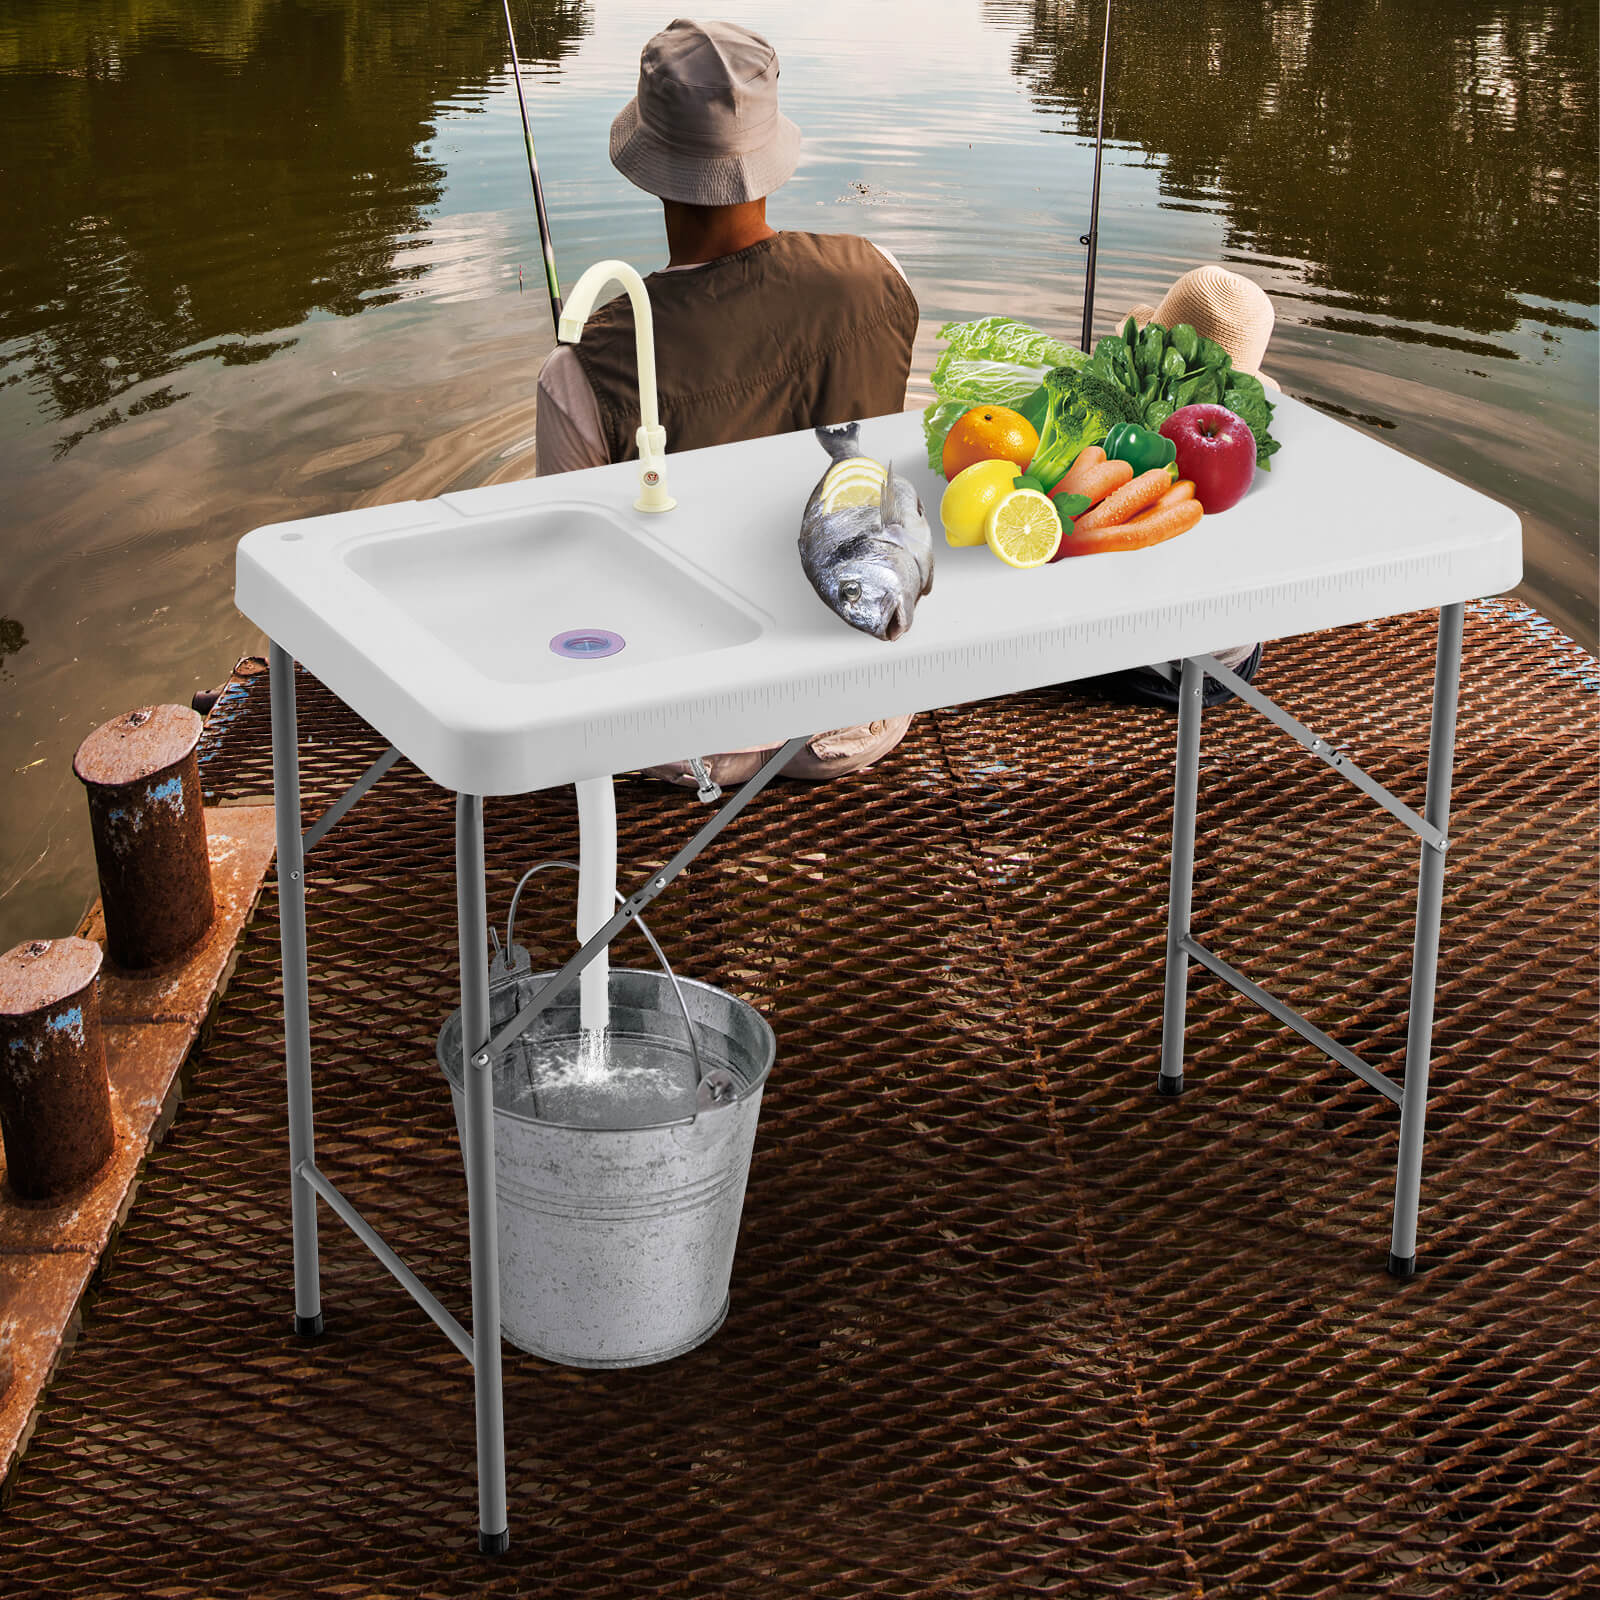 Portable_Folding_Camping_Table_with_Sink_and_Rotatable_Faucet_for_Fish_Cleaning-6.jpg